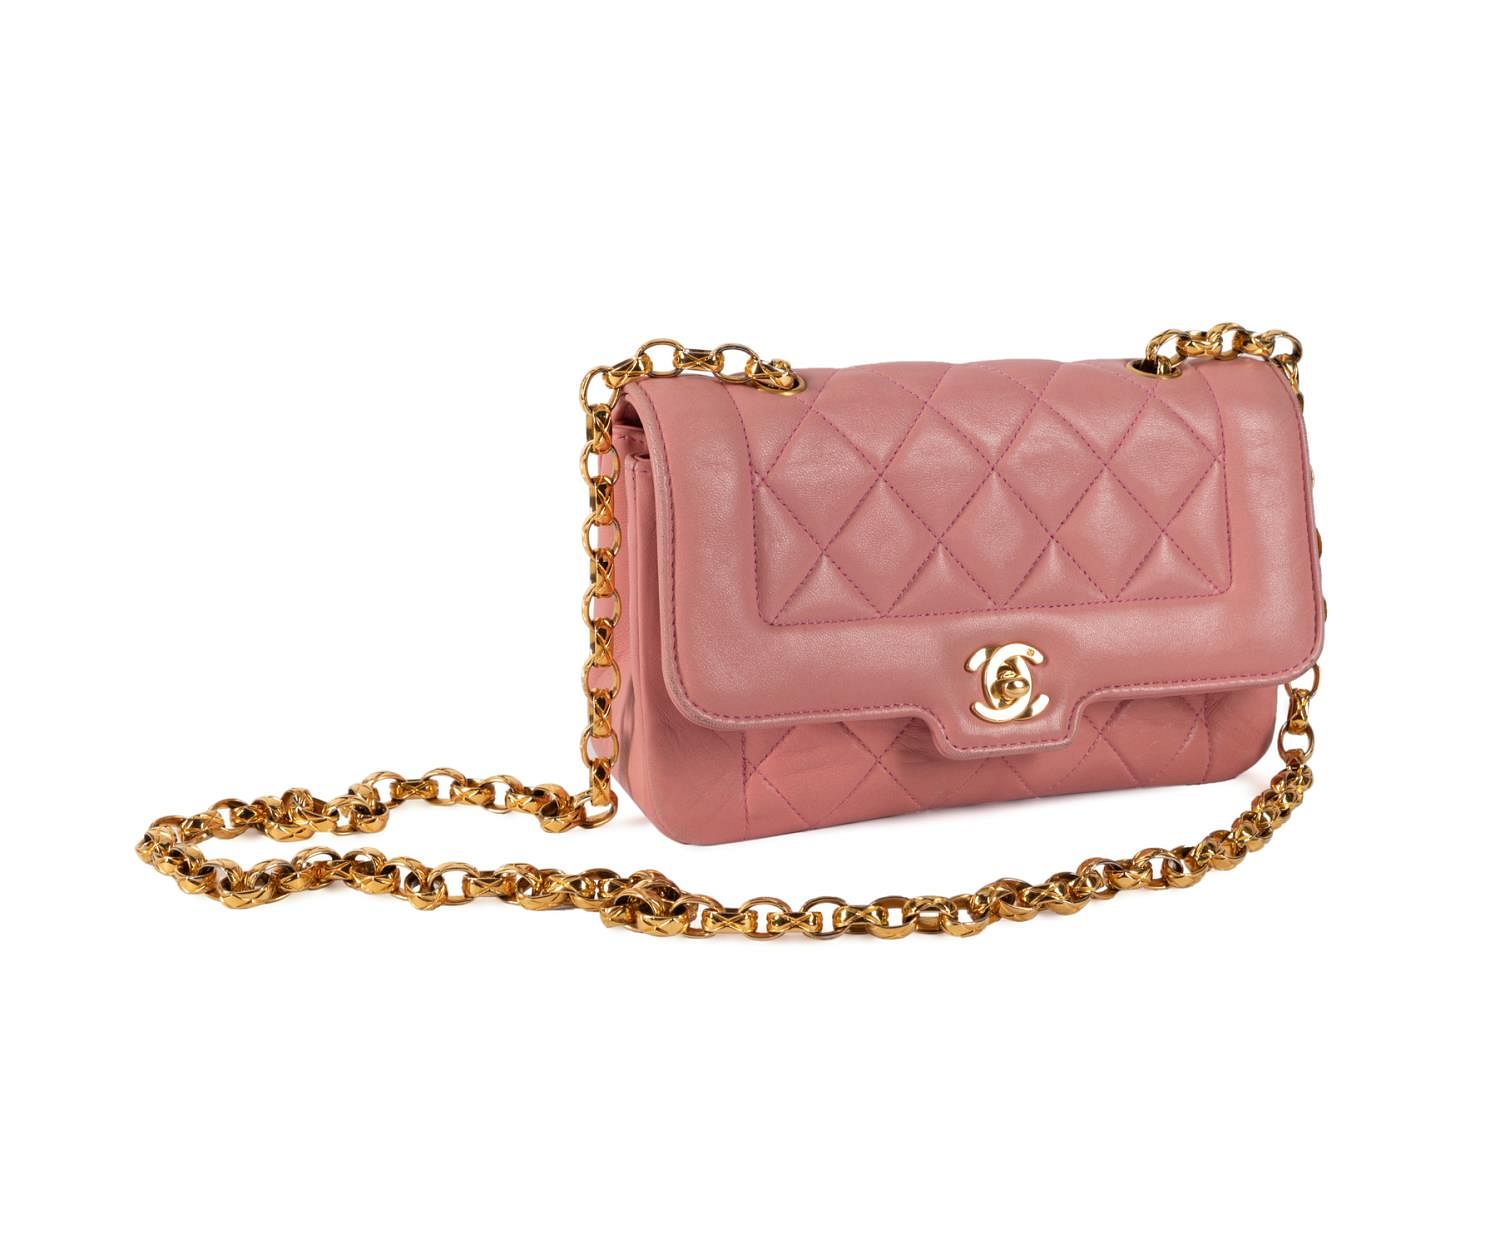 CHANEL MINI PINK DIANA FLAP BAG 1989-1991 for sale at auction on